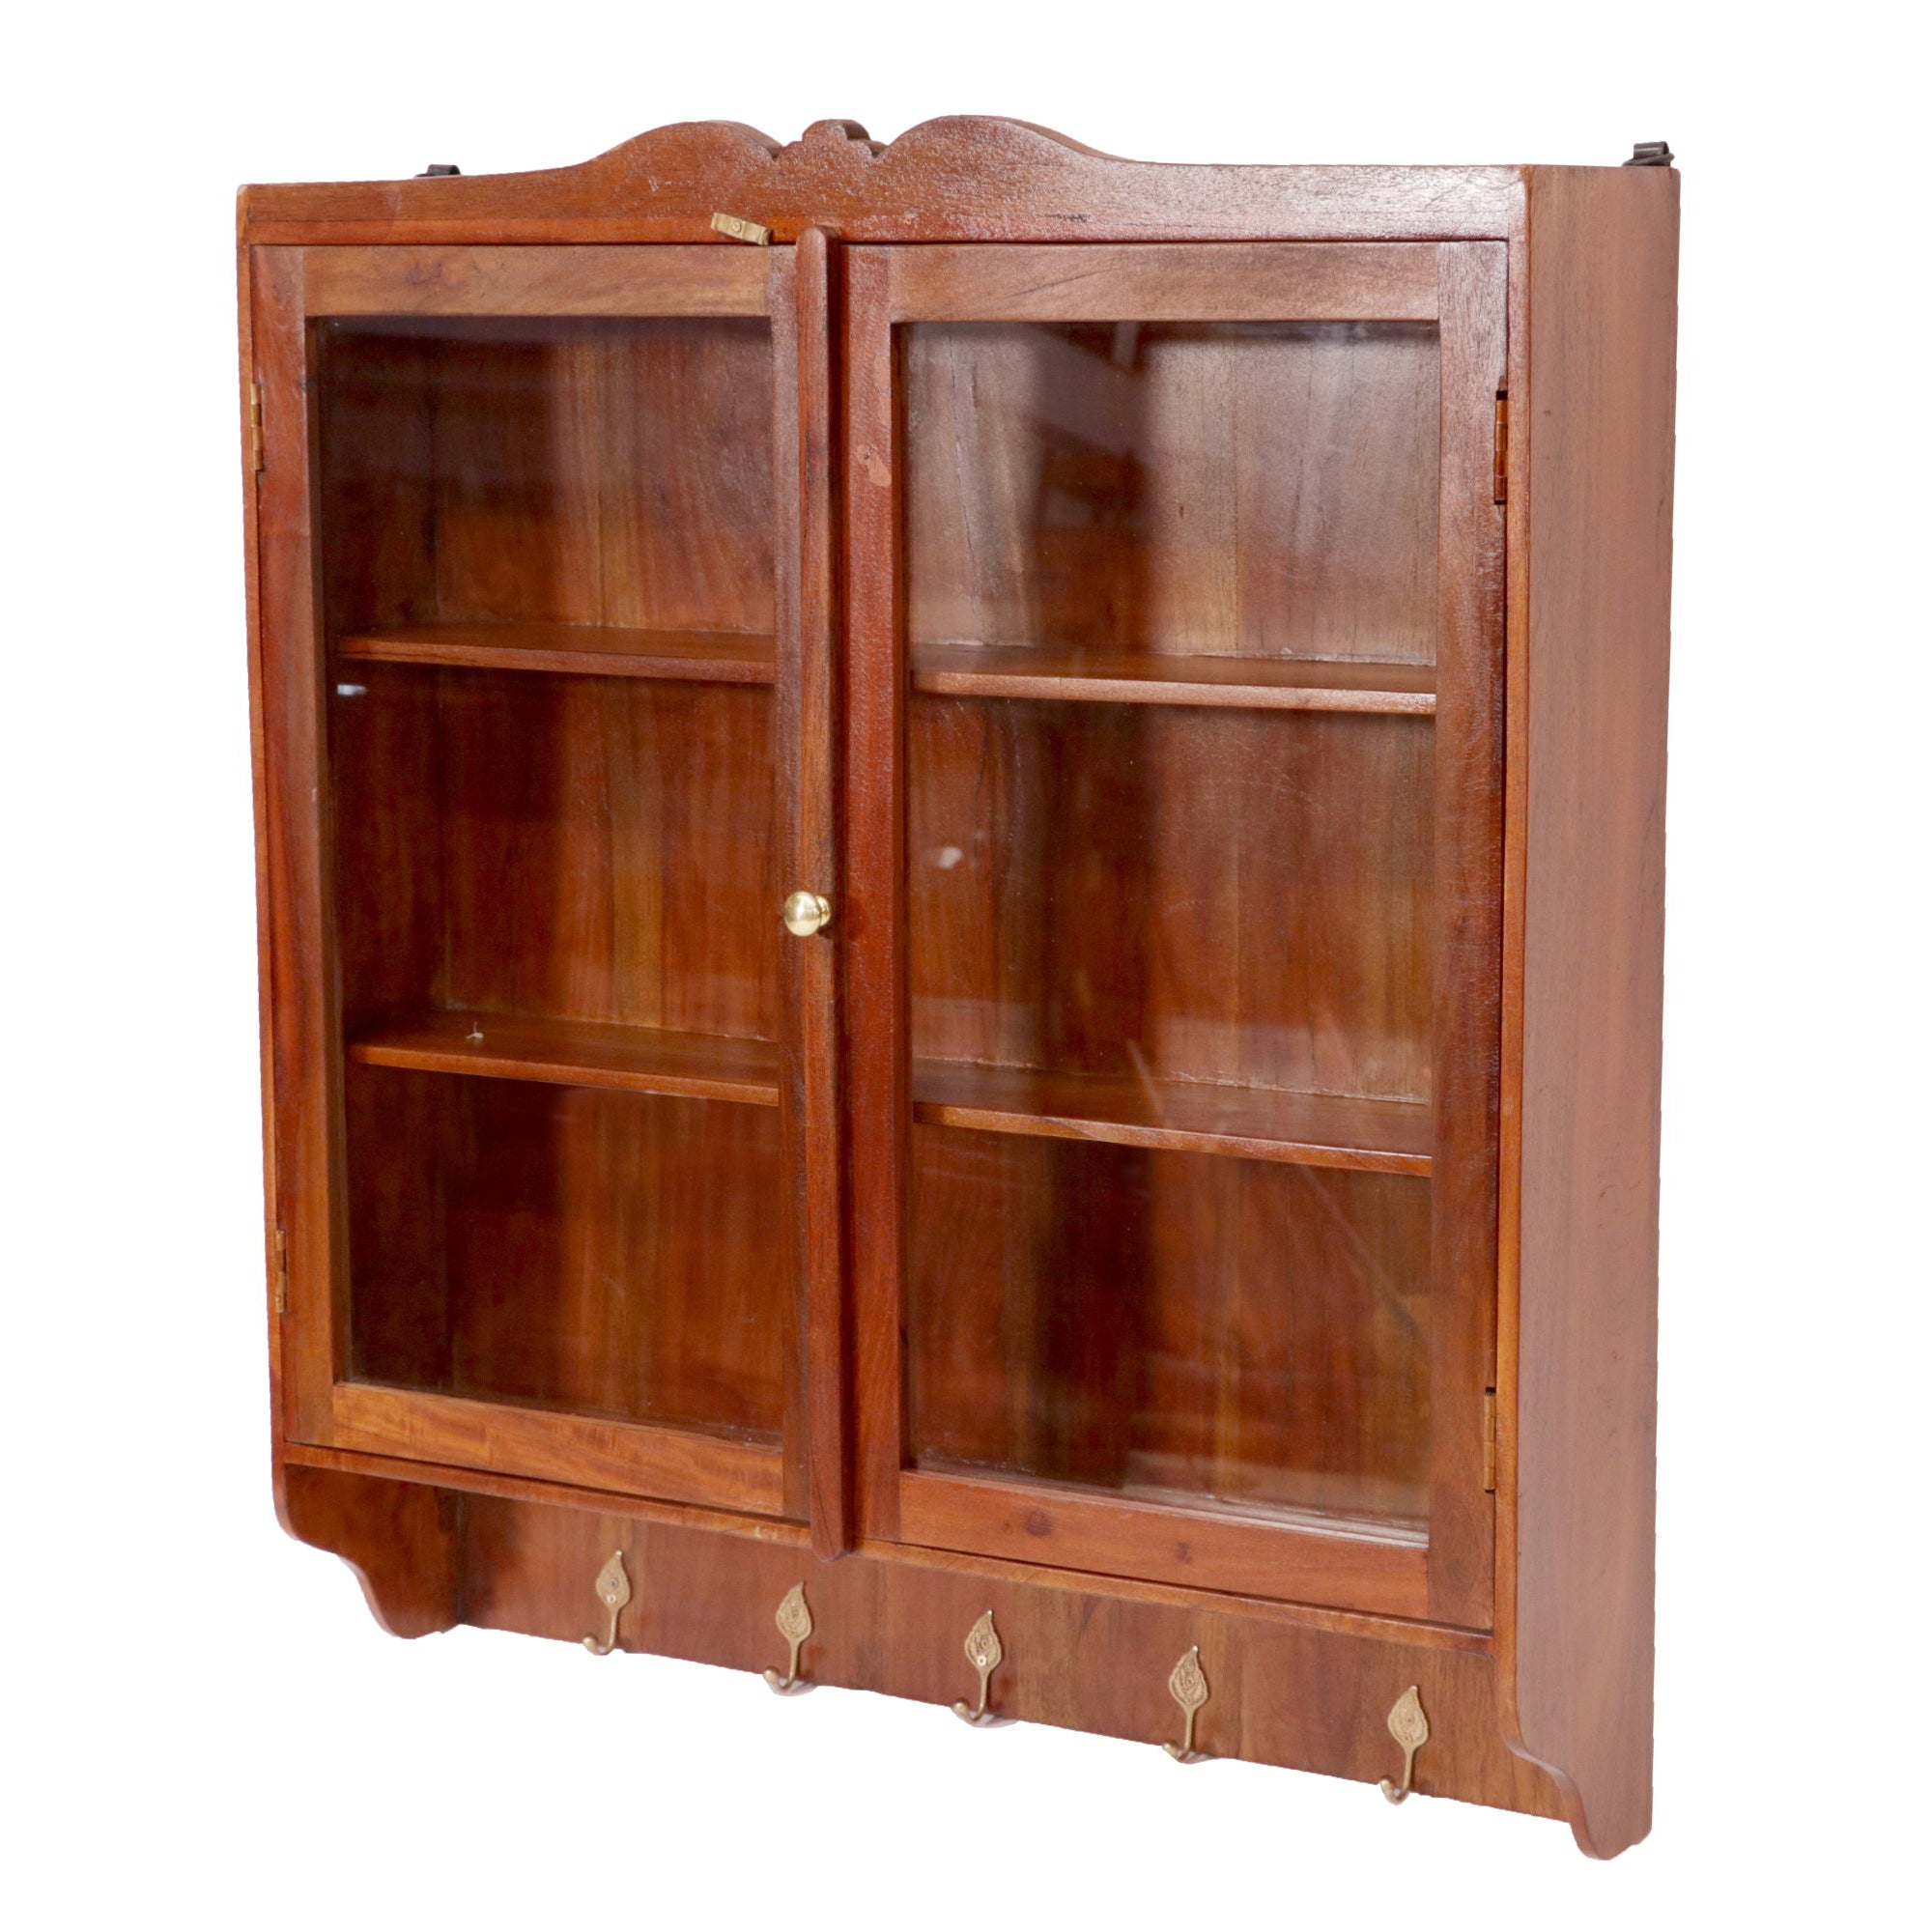 32 x 9 x 36 Inch Long-Wide Hanging Wooden Cabinet Wall Cabinet